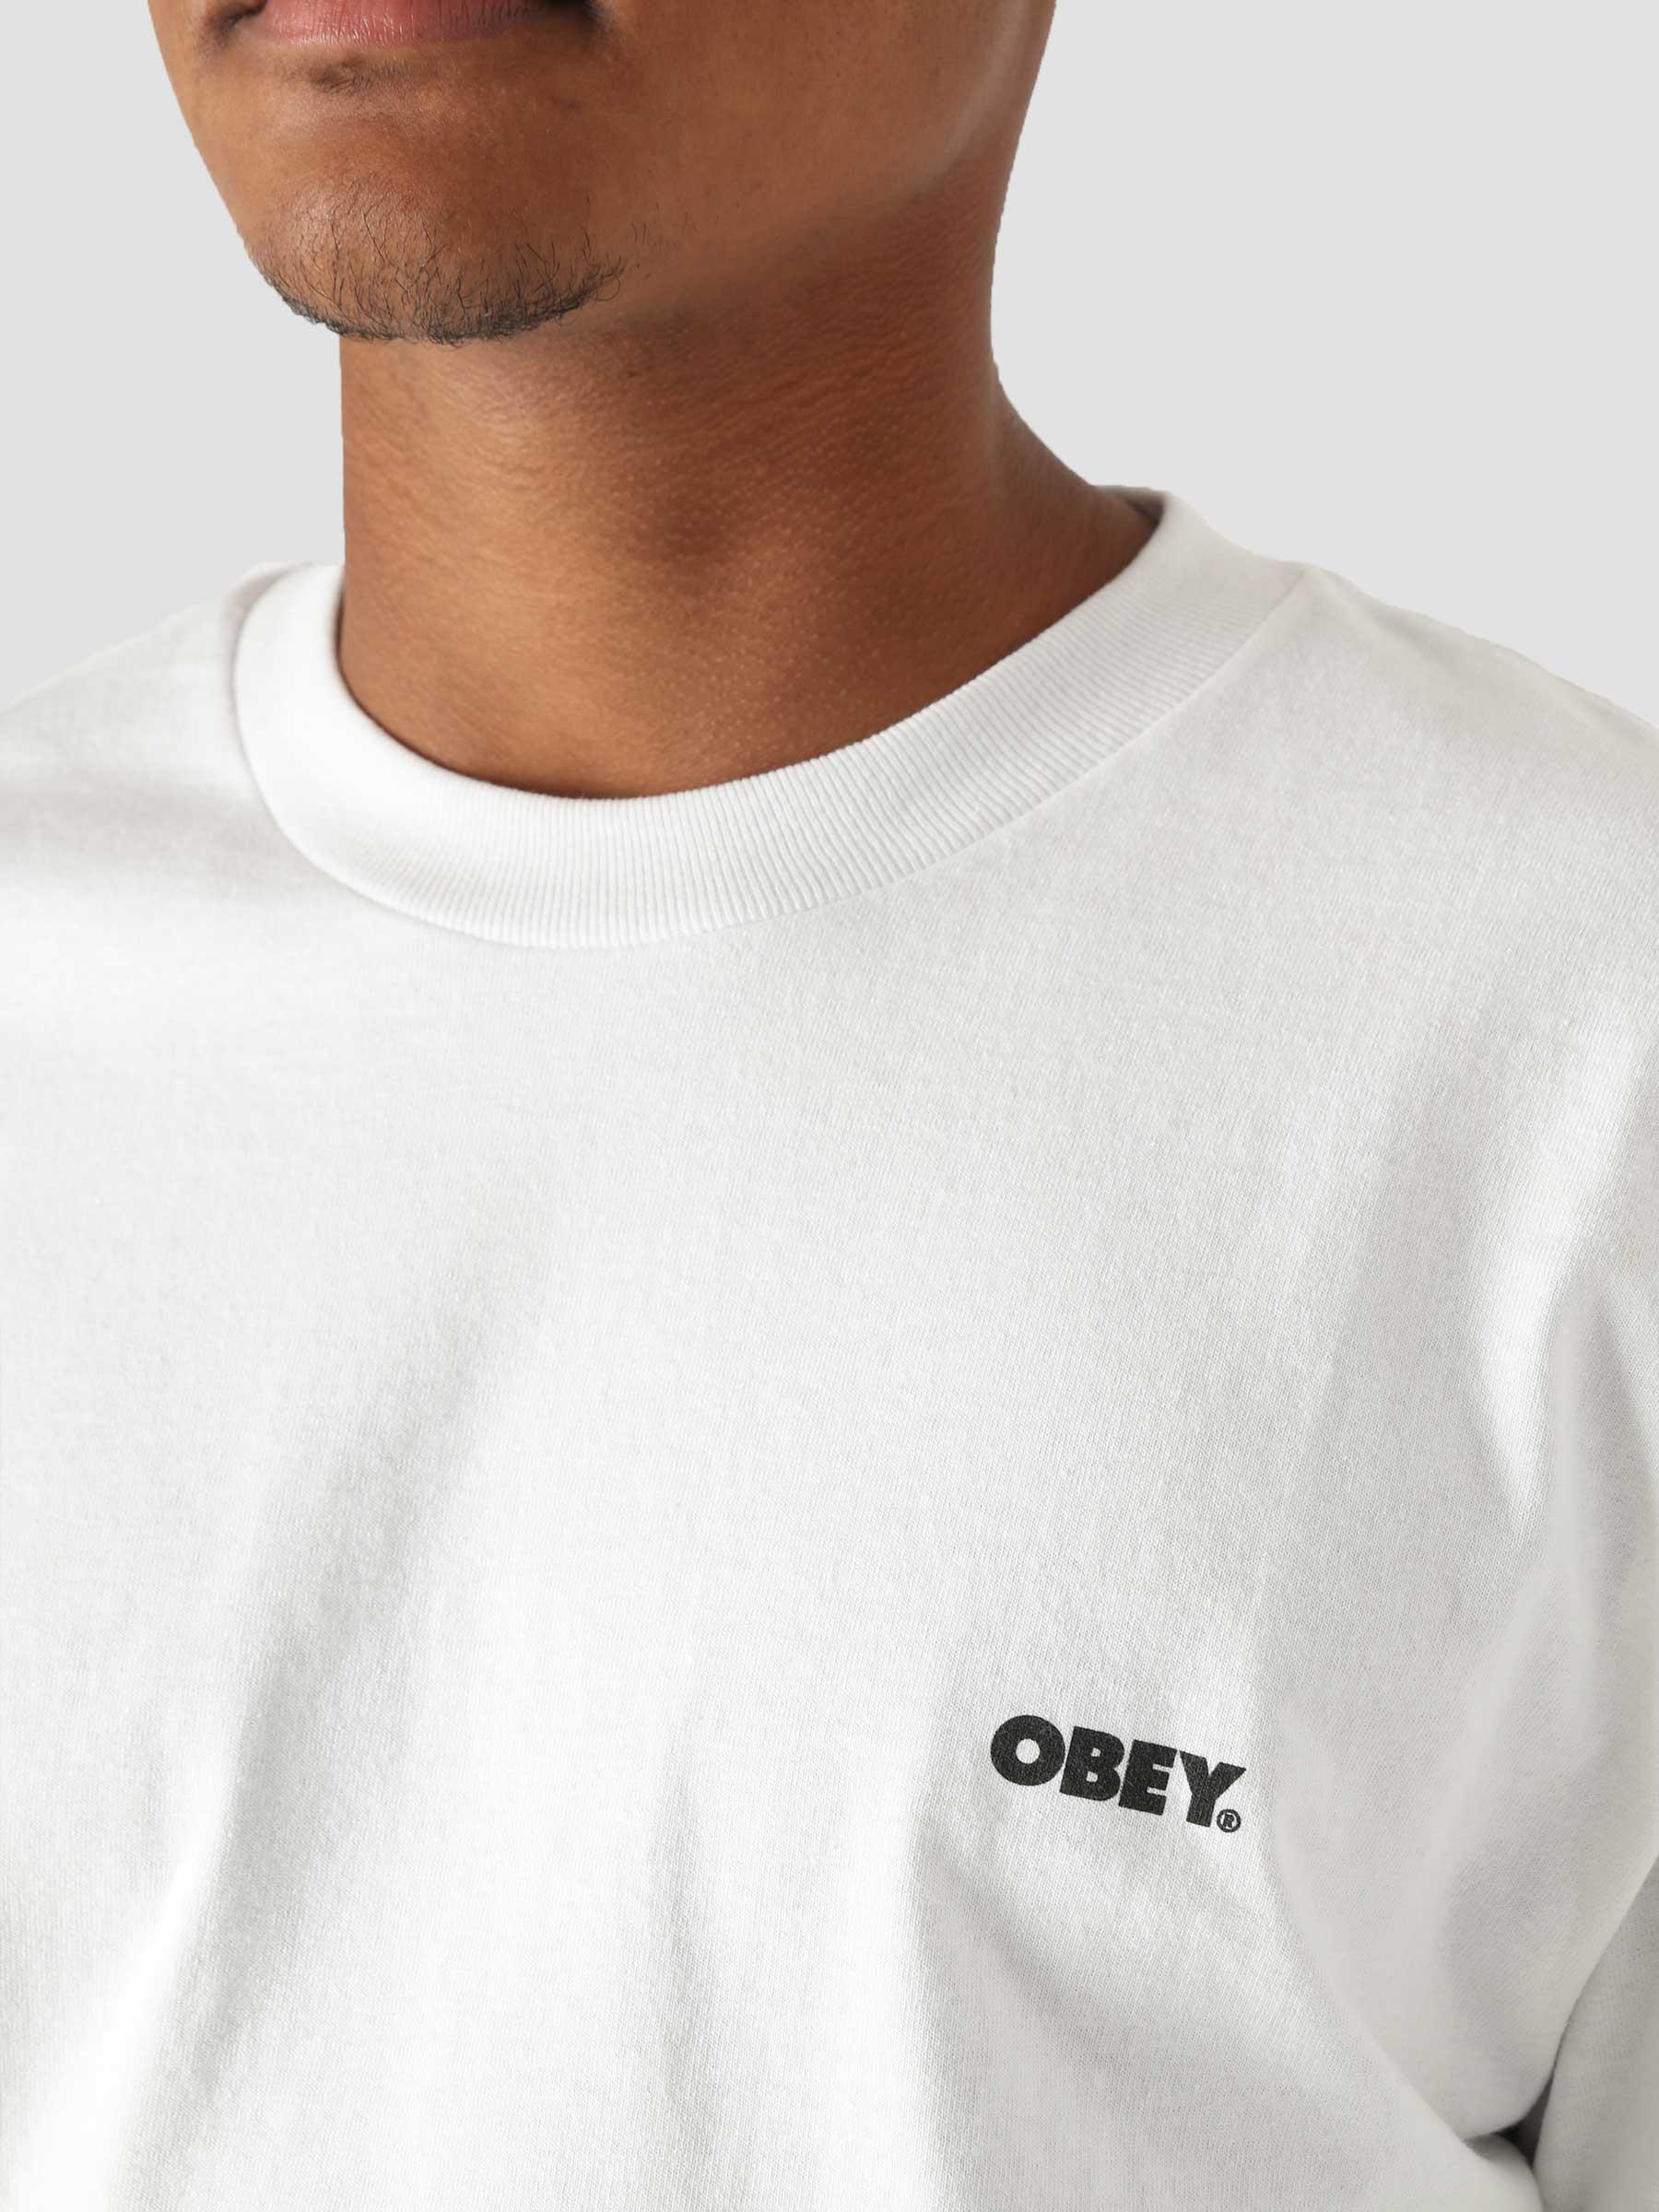 Obey Peace T-Shirt White 165262515